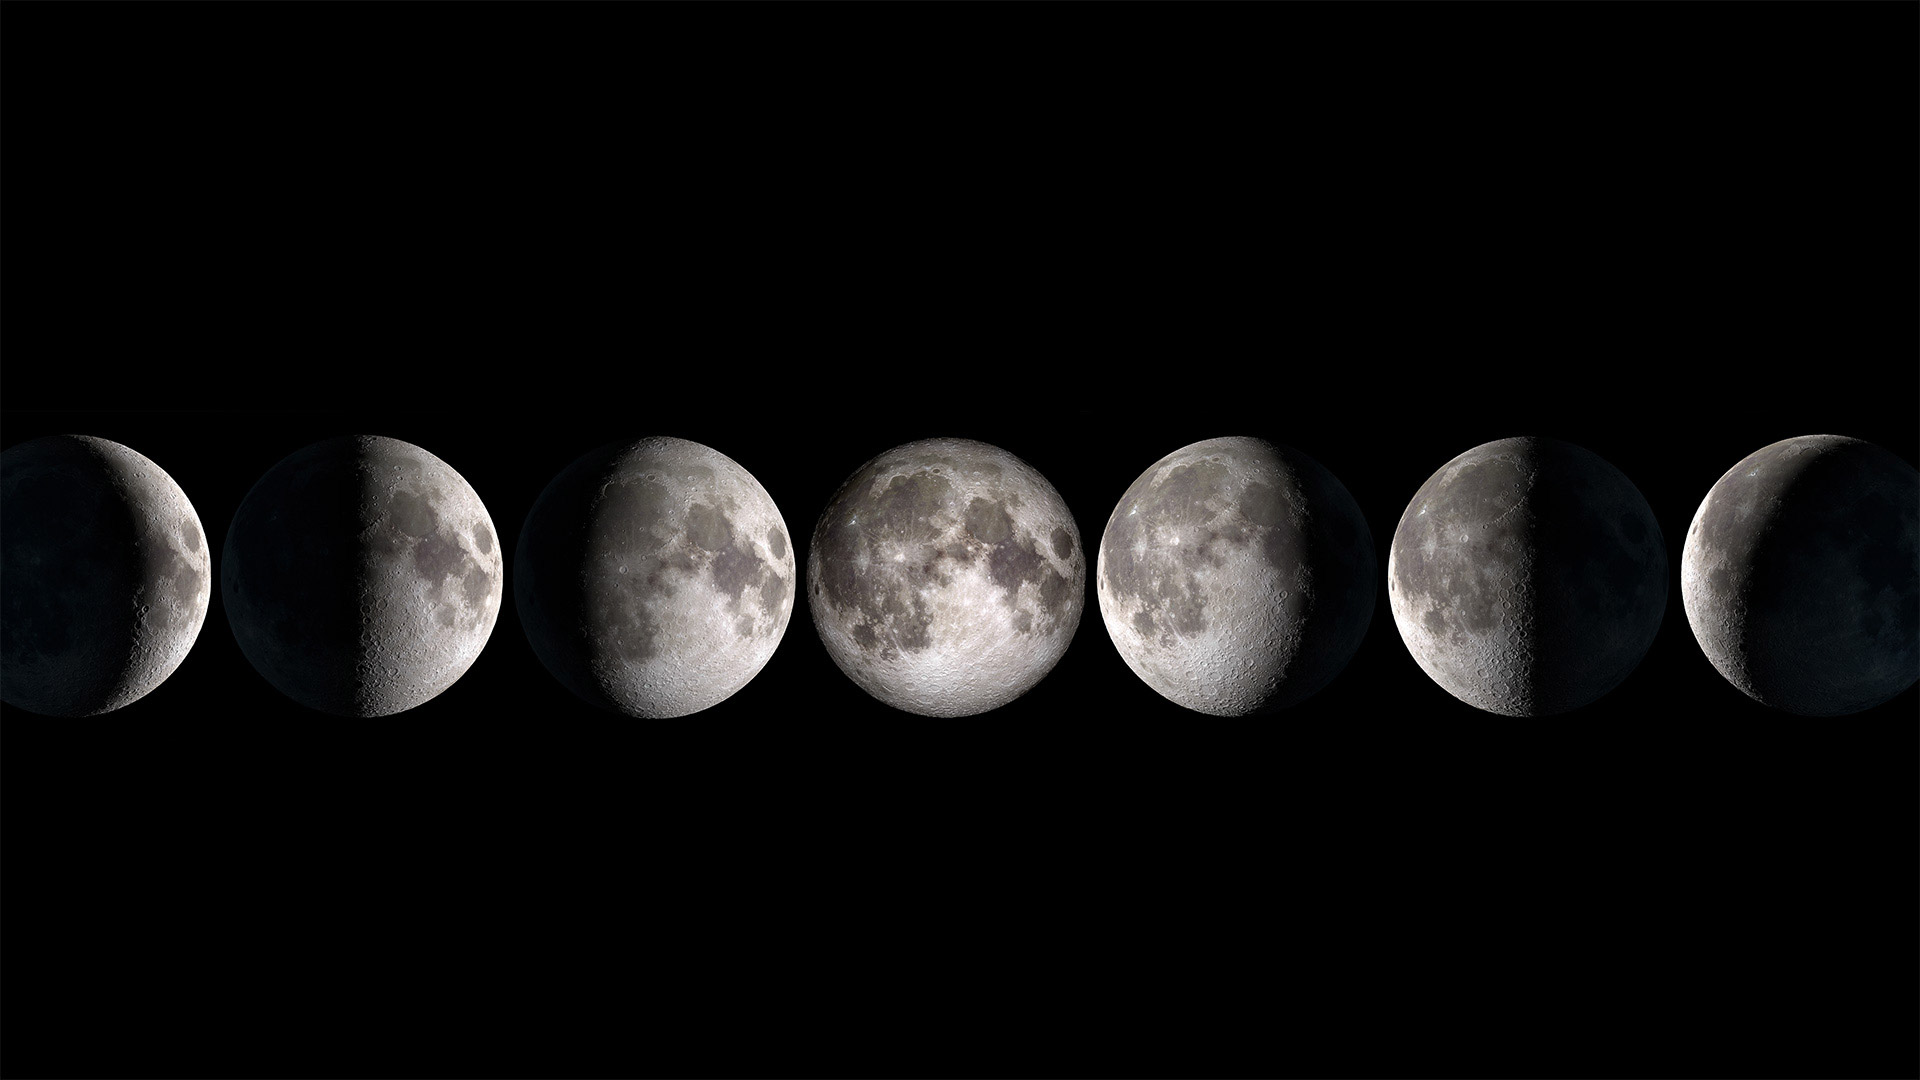 Composite photo showing the phases of the moon - Delpixart/Getty Images)